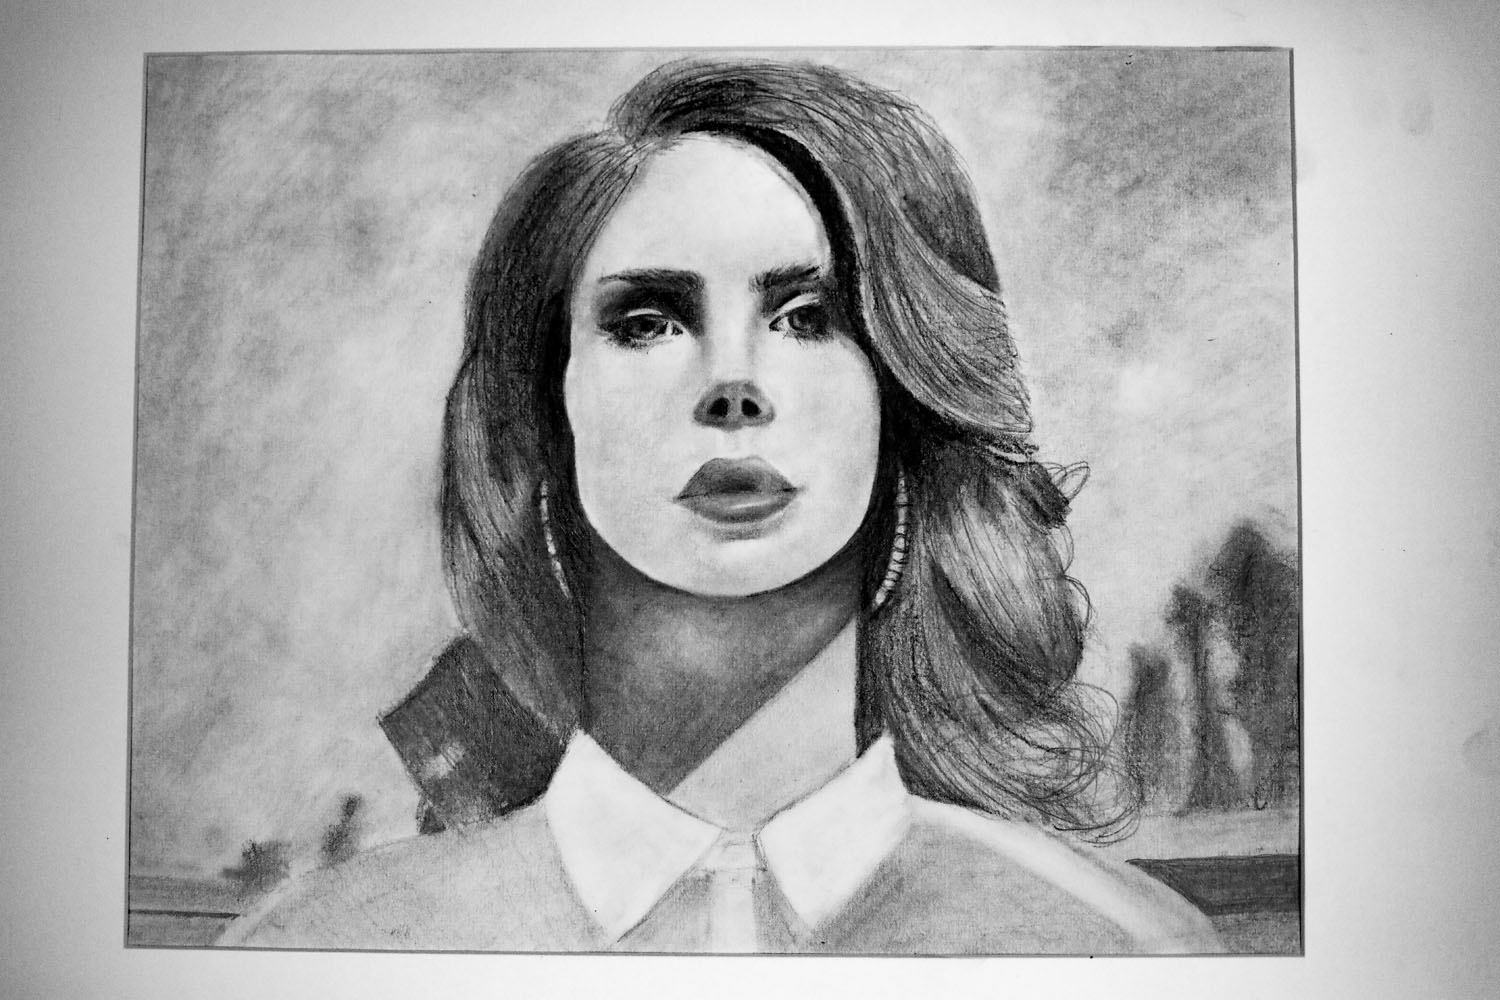 Pencil drawing of a woman in dramatic lighting